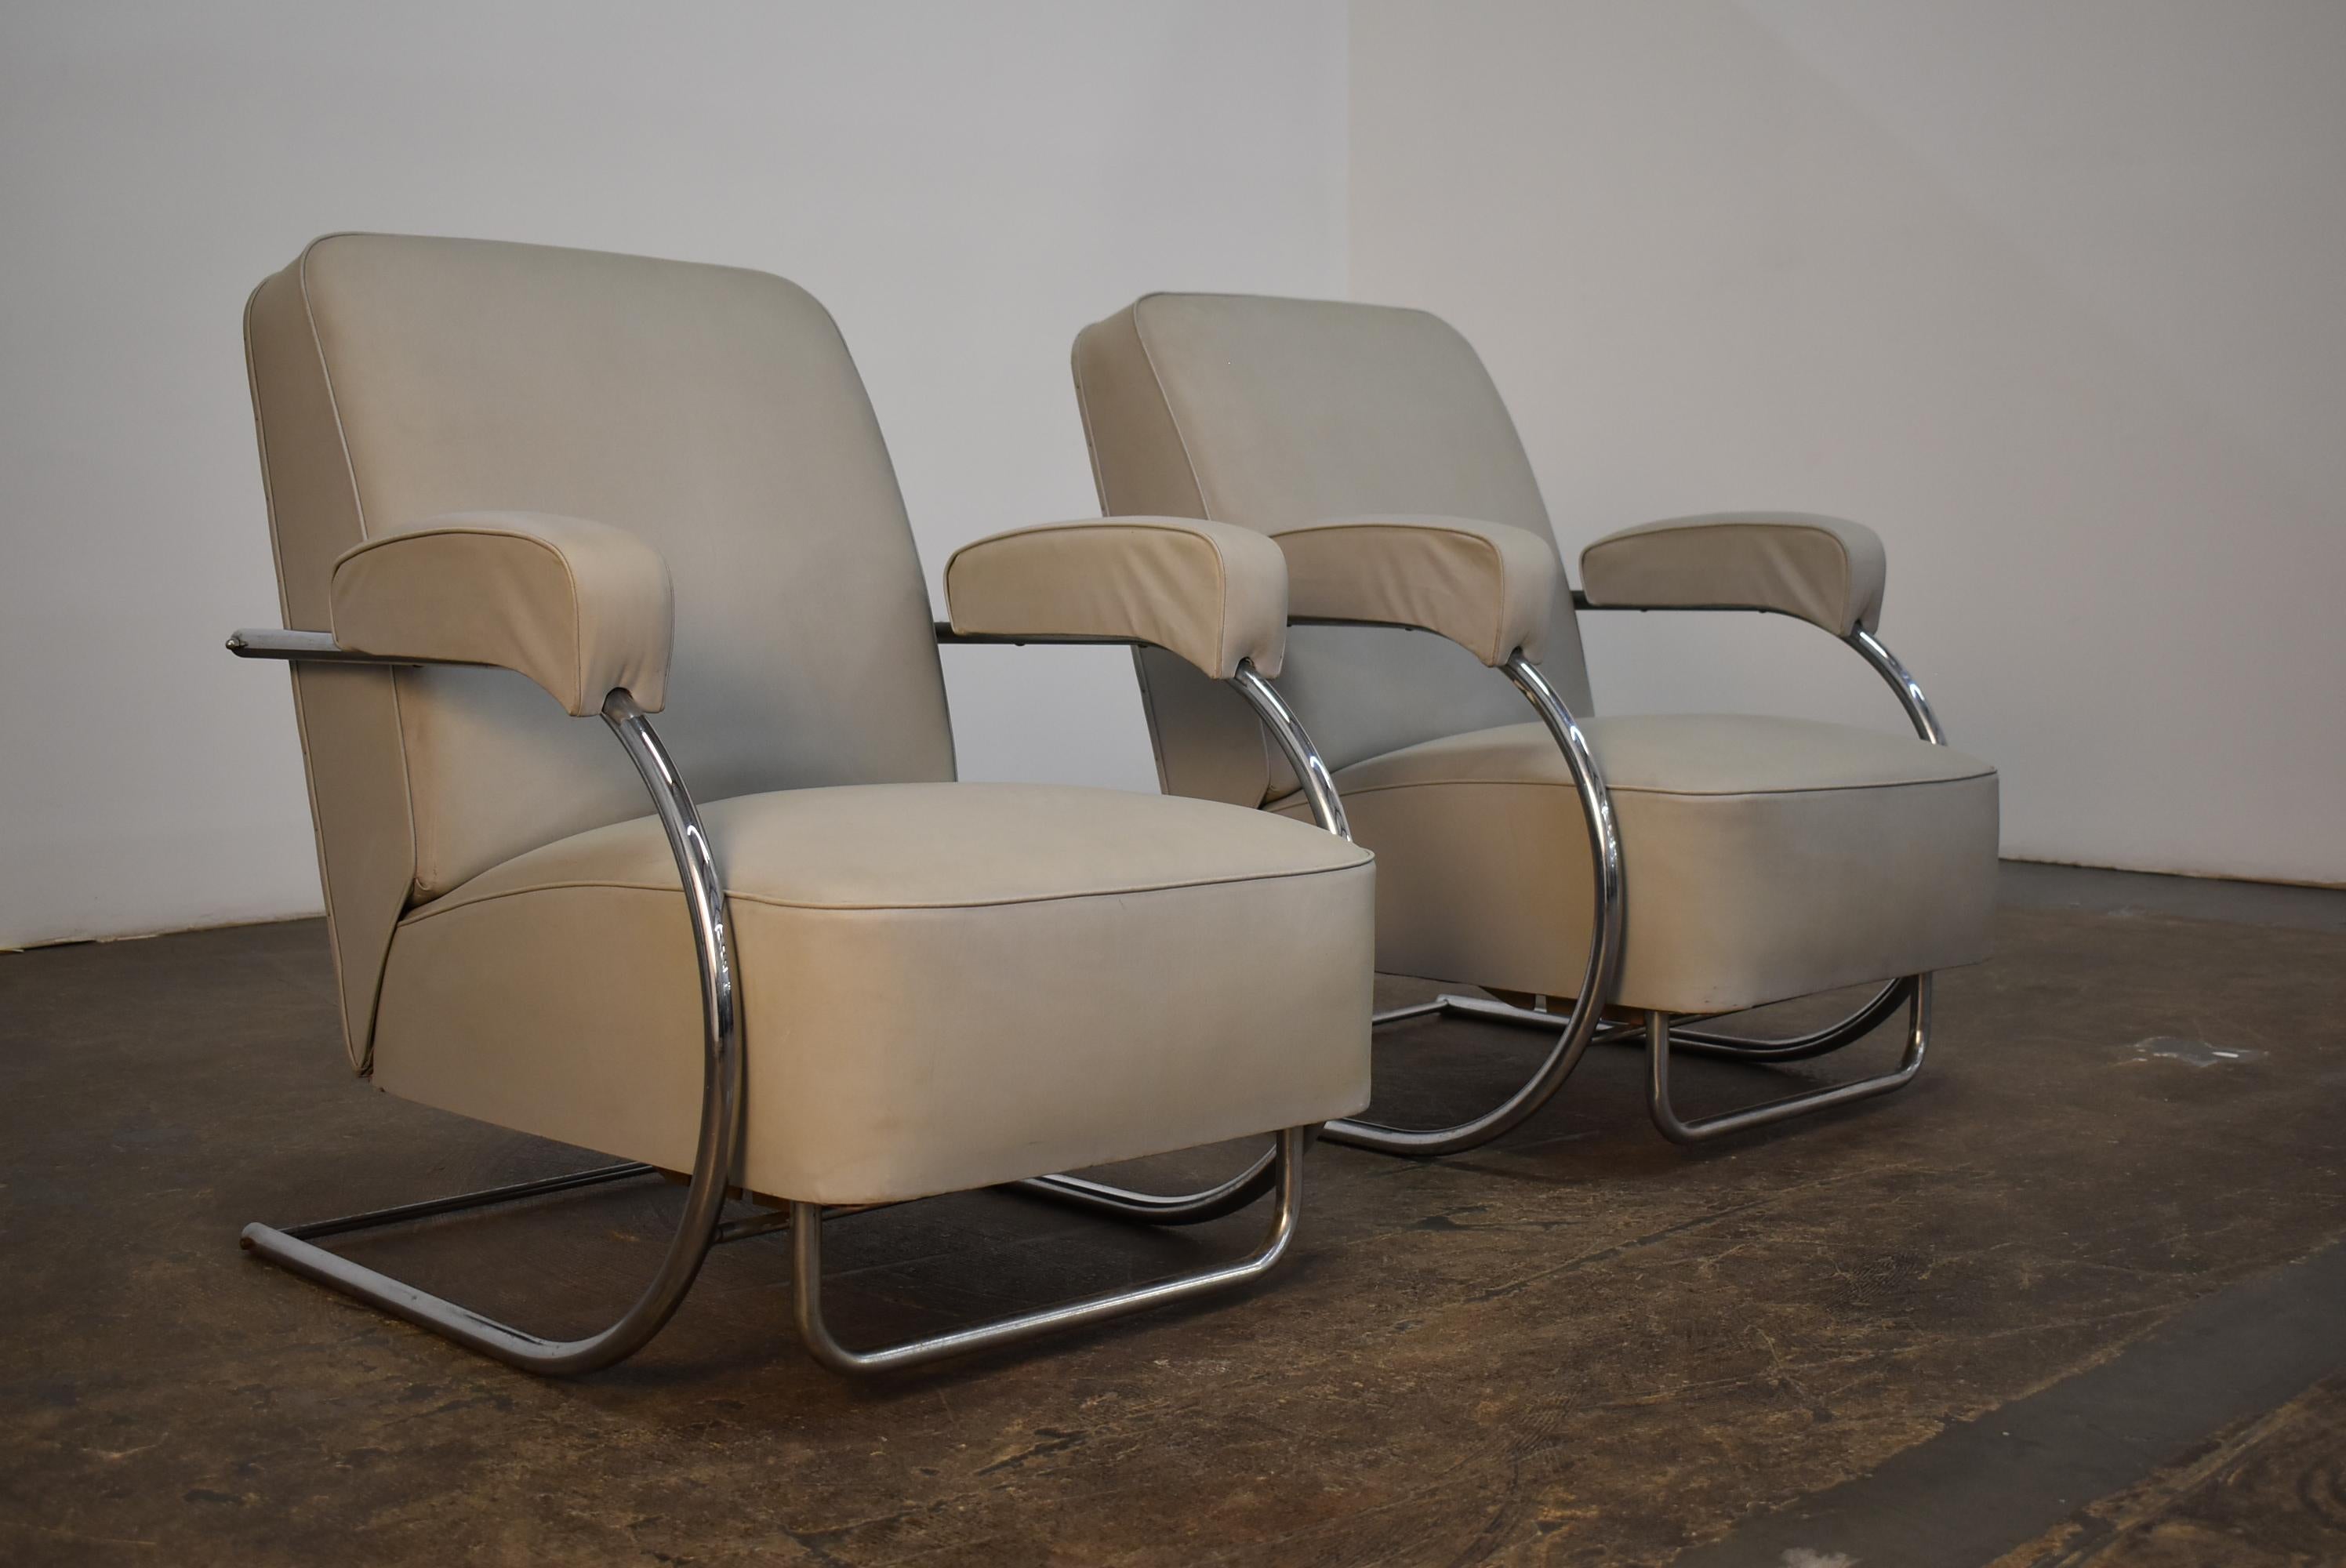 1930s French Art Deco Reclining Moleskin Chairs In Good Condition For Sale In Torrance, CA